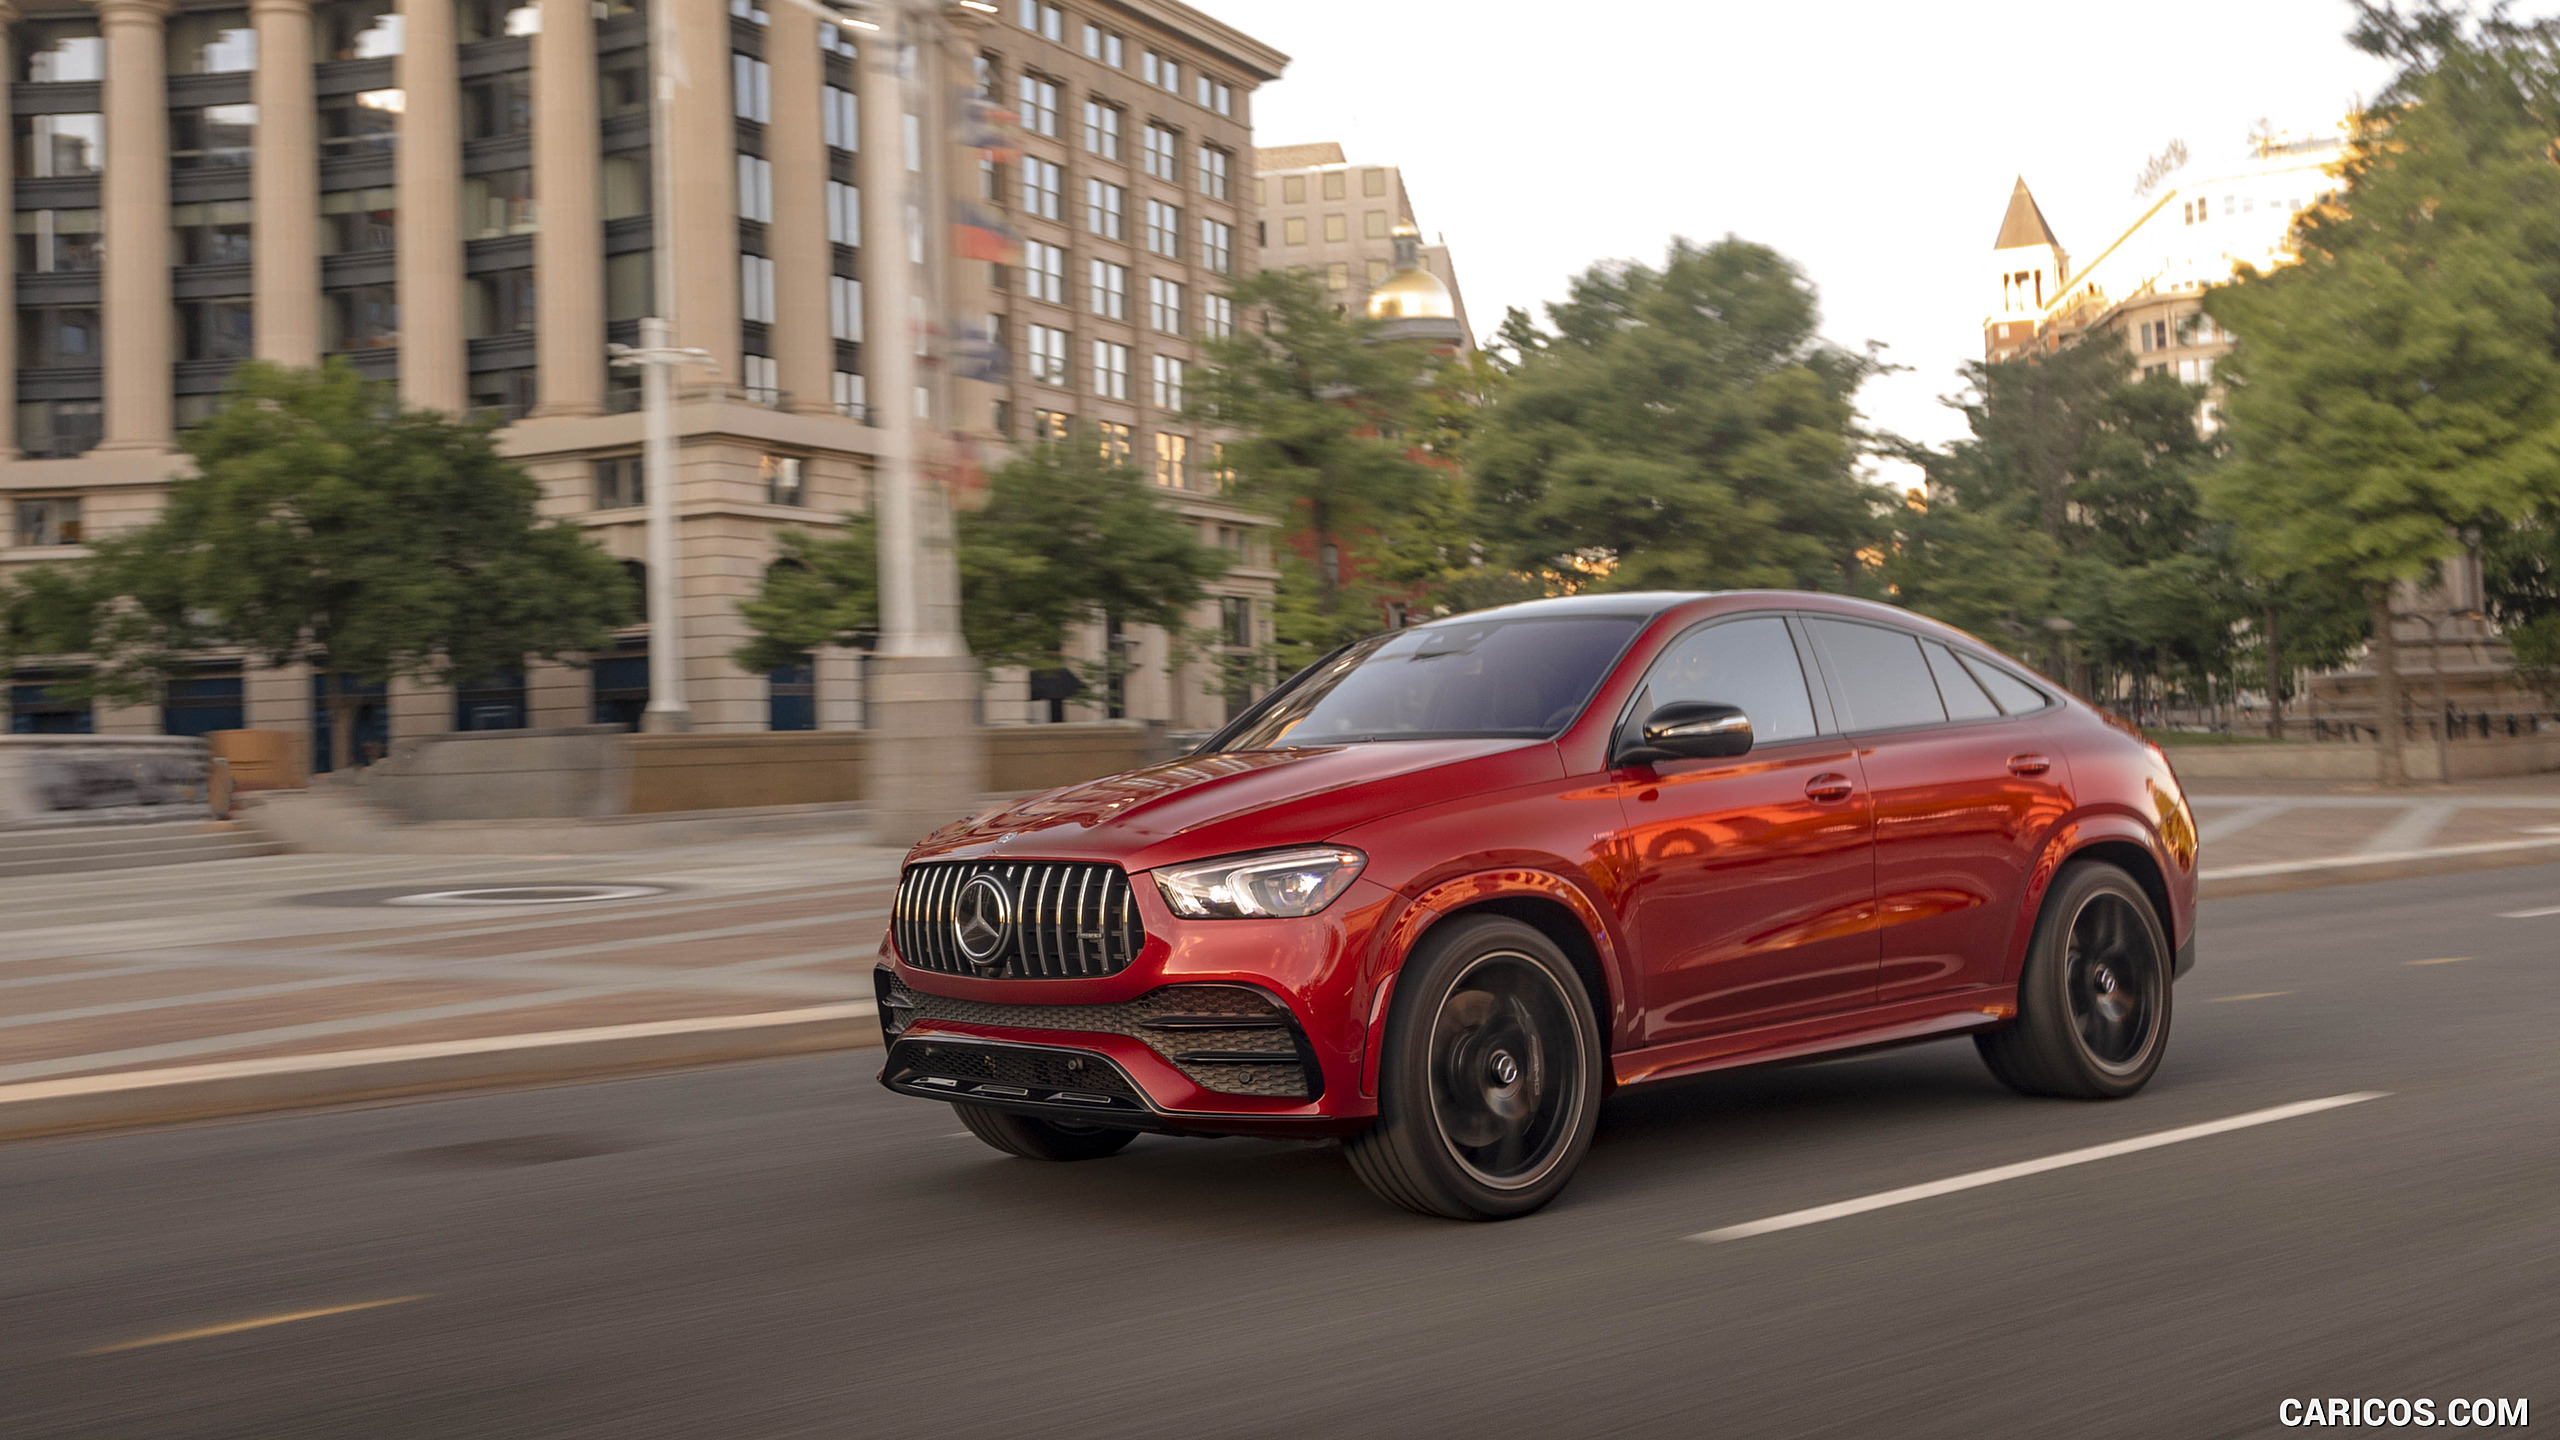 2021 Mercedes-AMG GLE 53 Coupe - Front Three-Quarter, #123 of 178